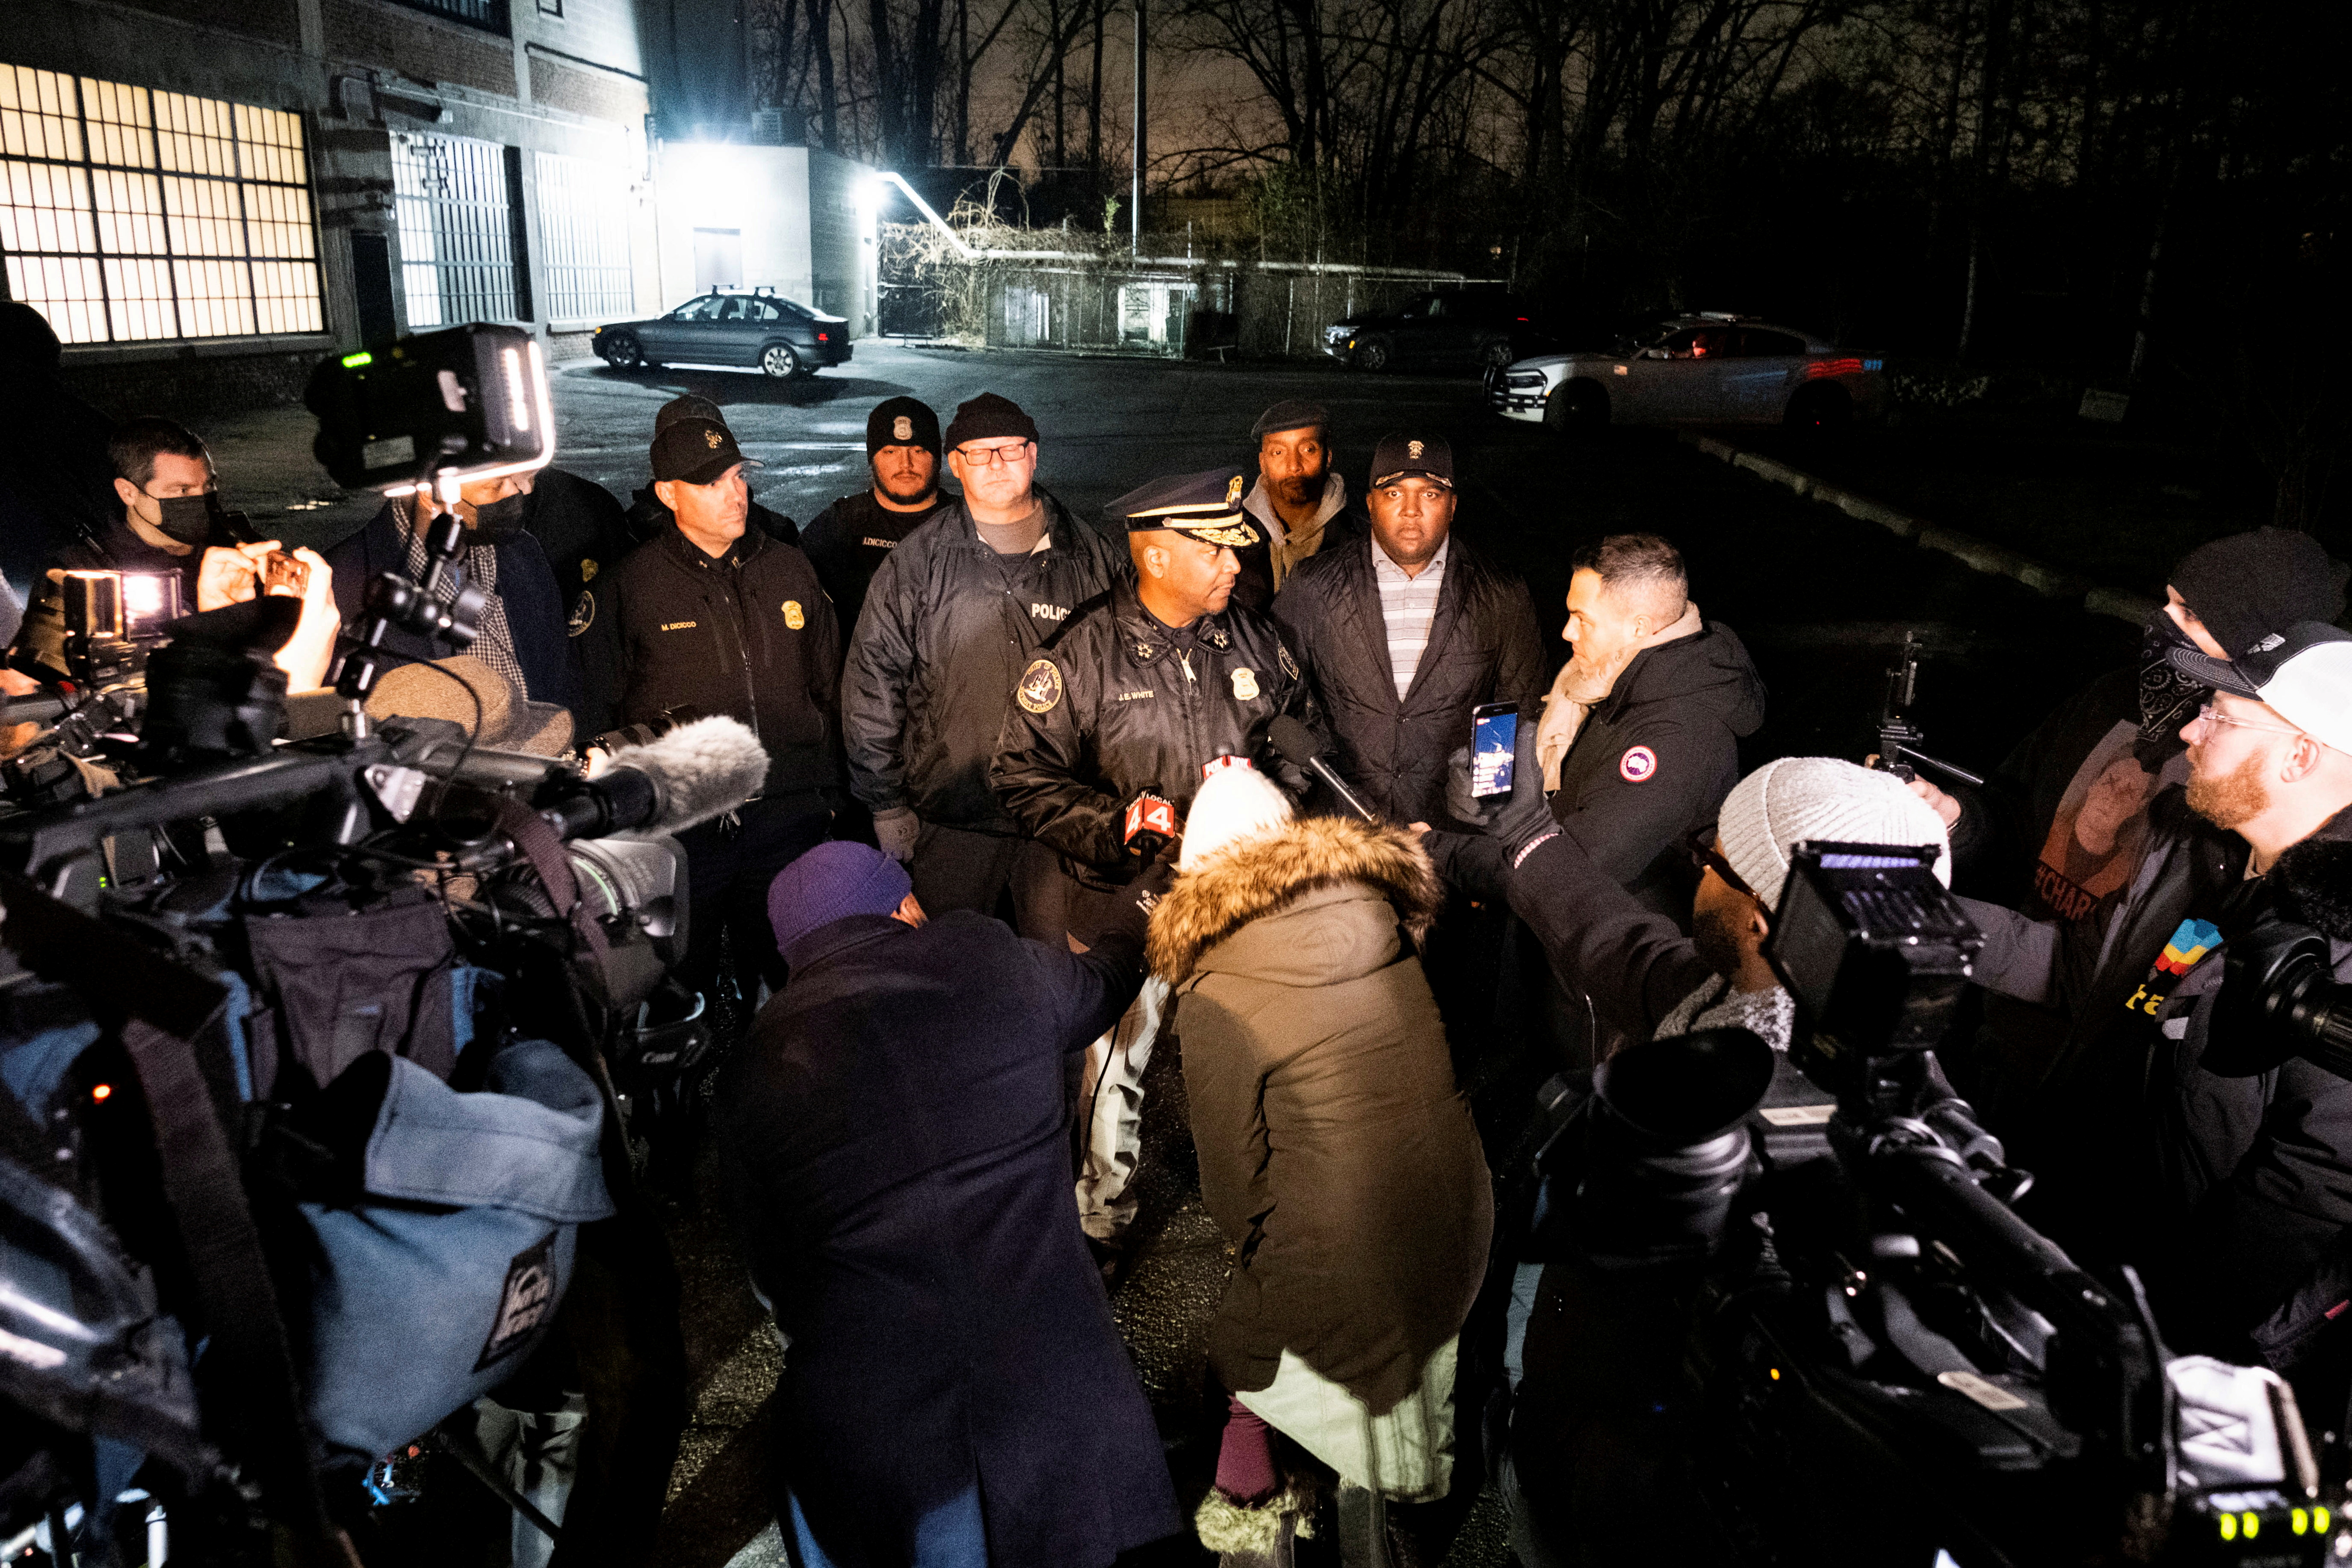 File Image: Detroit Police Chief James White speaks to the media outside the Detroit Impression Company, where the parents of school shooter Ethan Crumbley were found hiding and taken into police custody early Saturday morning in Detroit, USA USA, December 4, 2021. REUTERS/Seth Herald